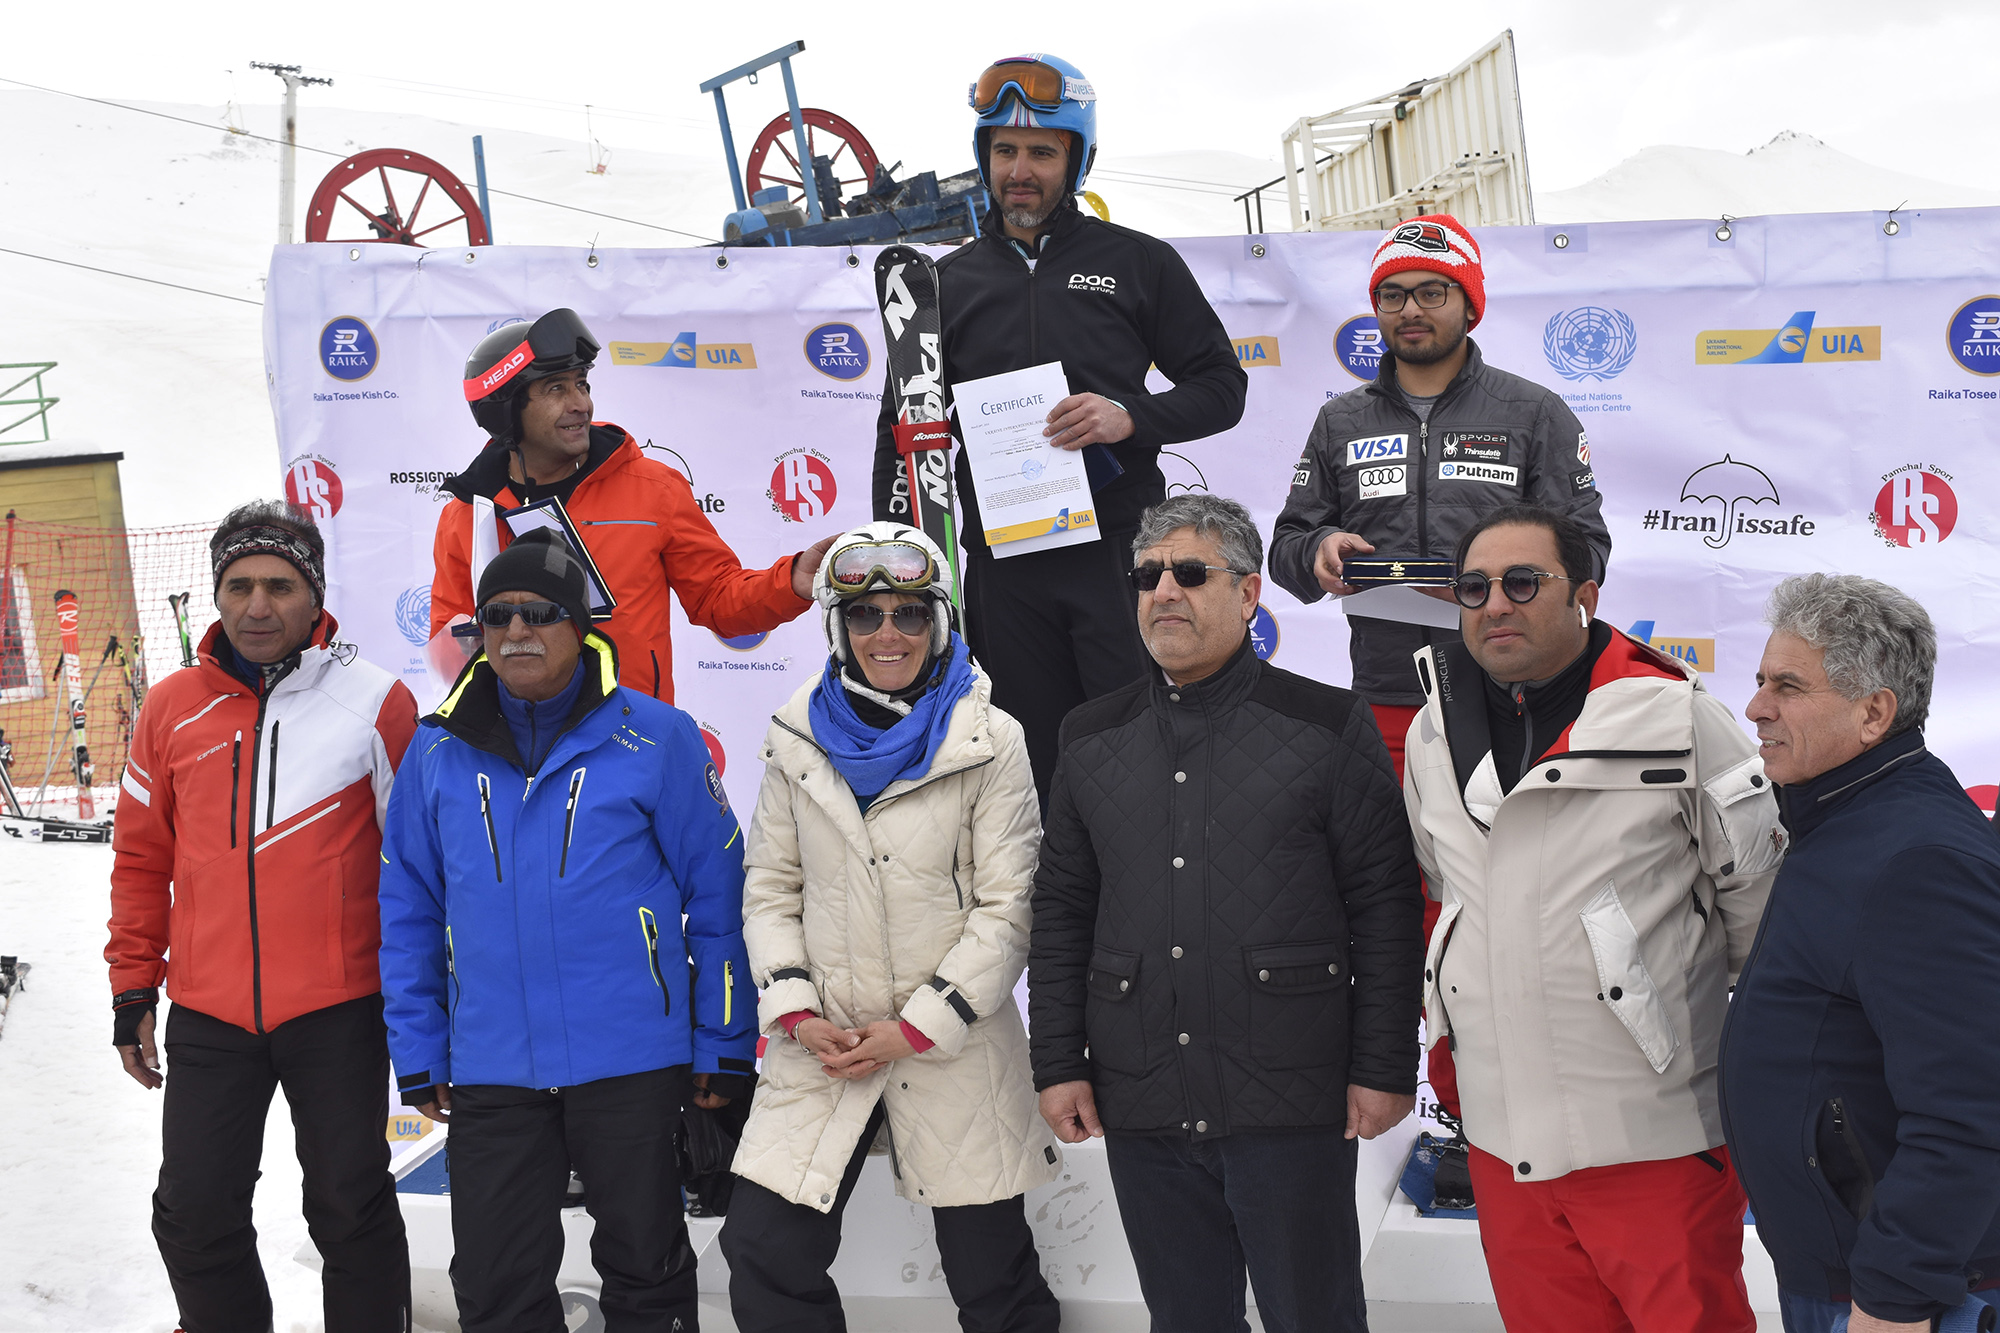 charity-ski-race-in-dizin-promotes-international-decade-for-action-water-for-sustainable-development-2018-2028